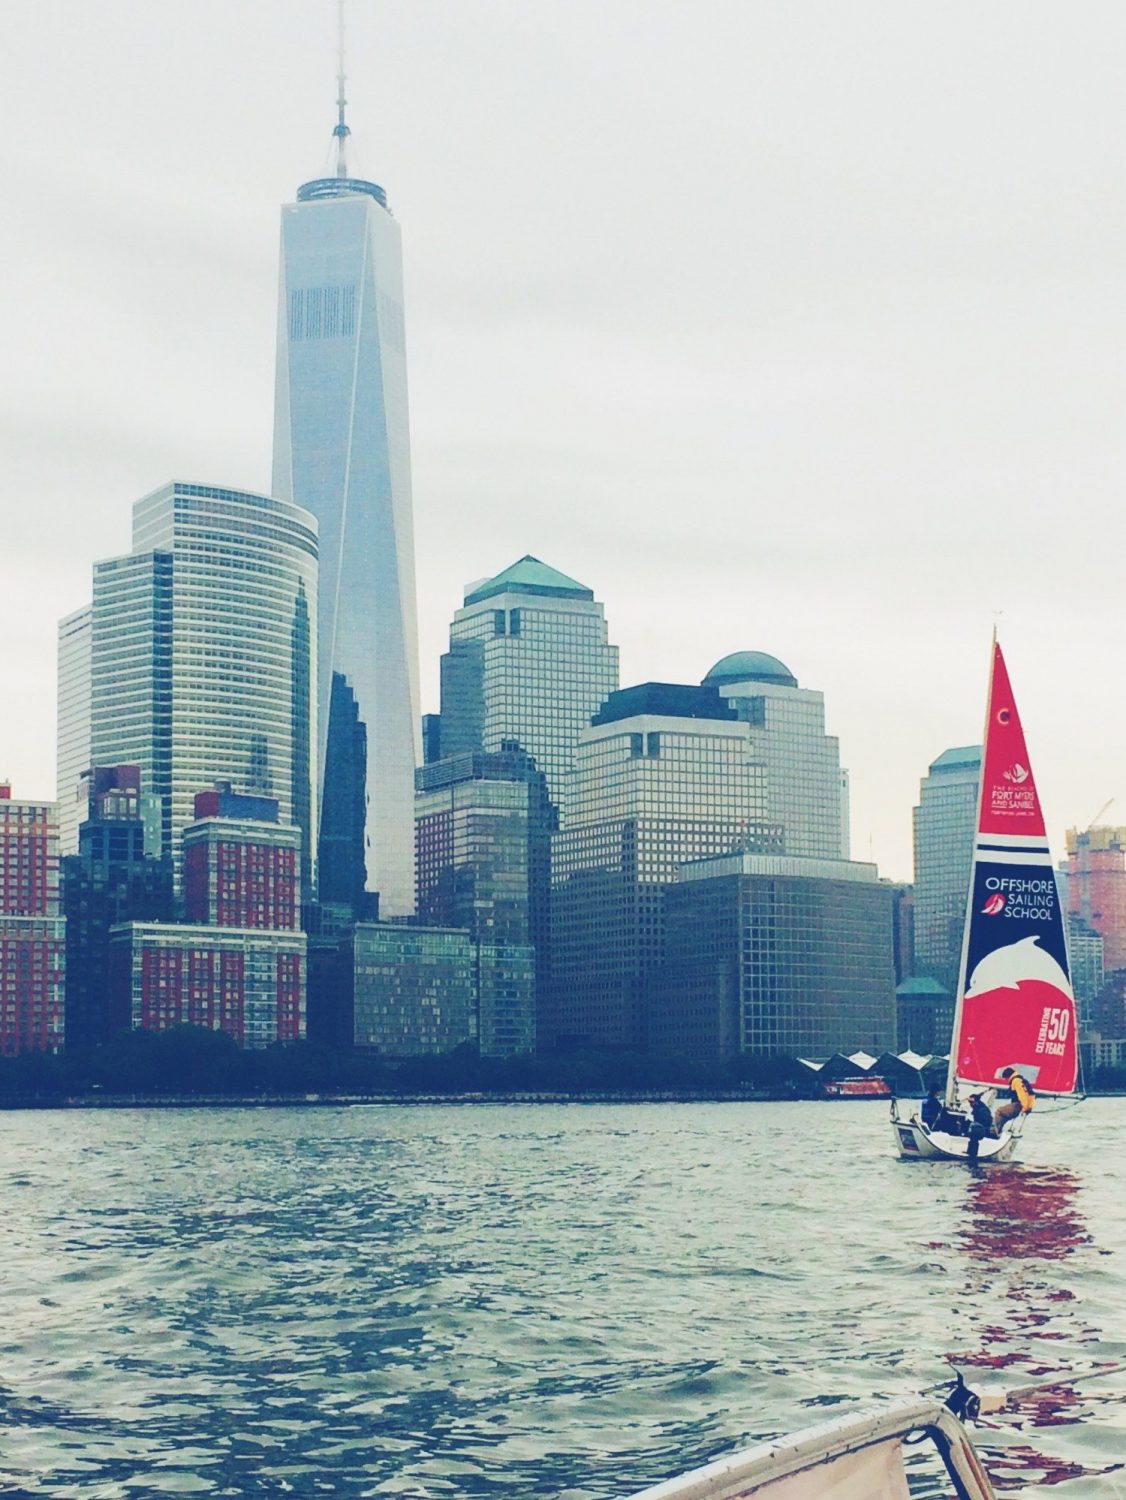 Brookfield Place Partners with America’s #1 Sailing School: Offshore Sailing School